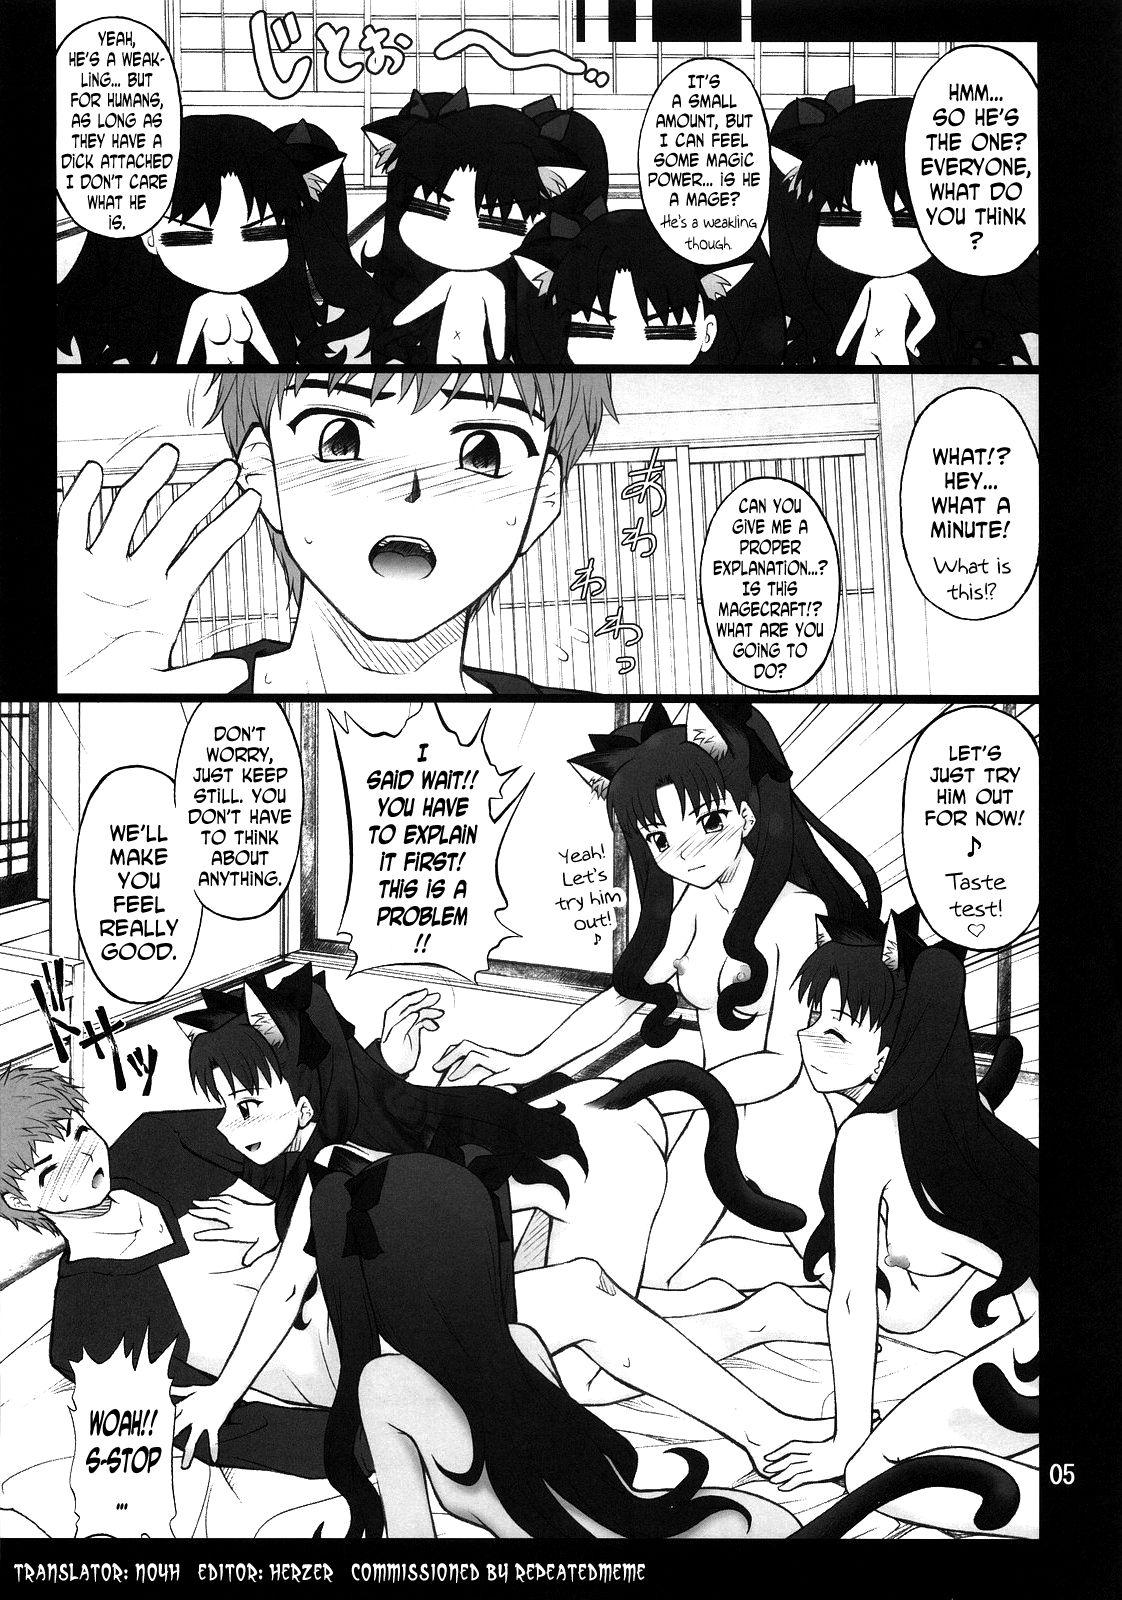 18 Porn Grem-Rin 2 - Fate stay night Nice - Page 4